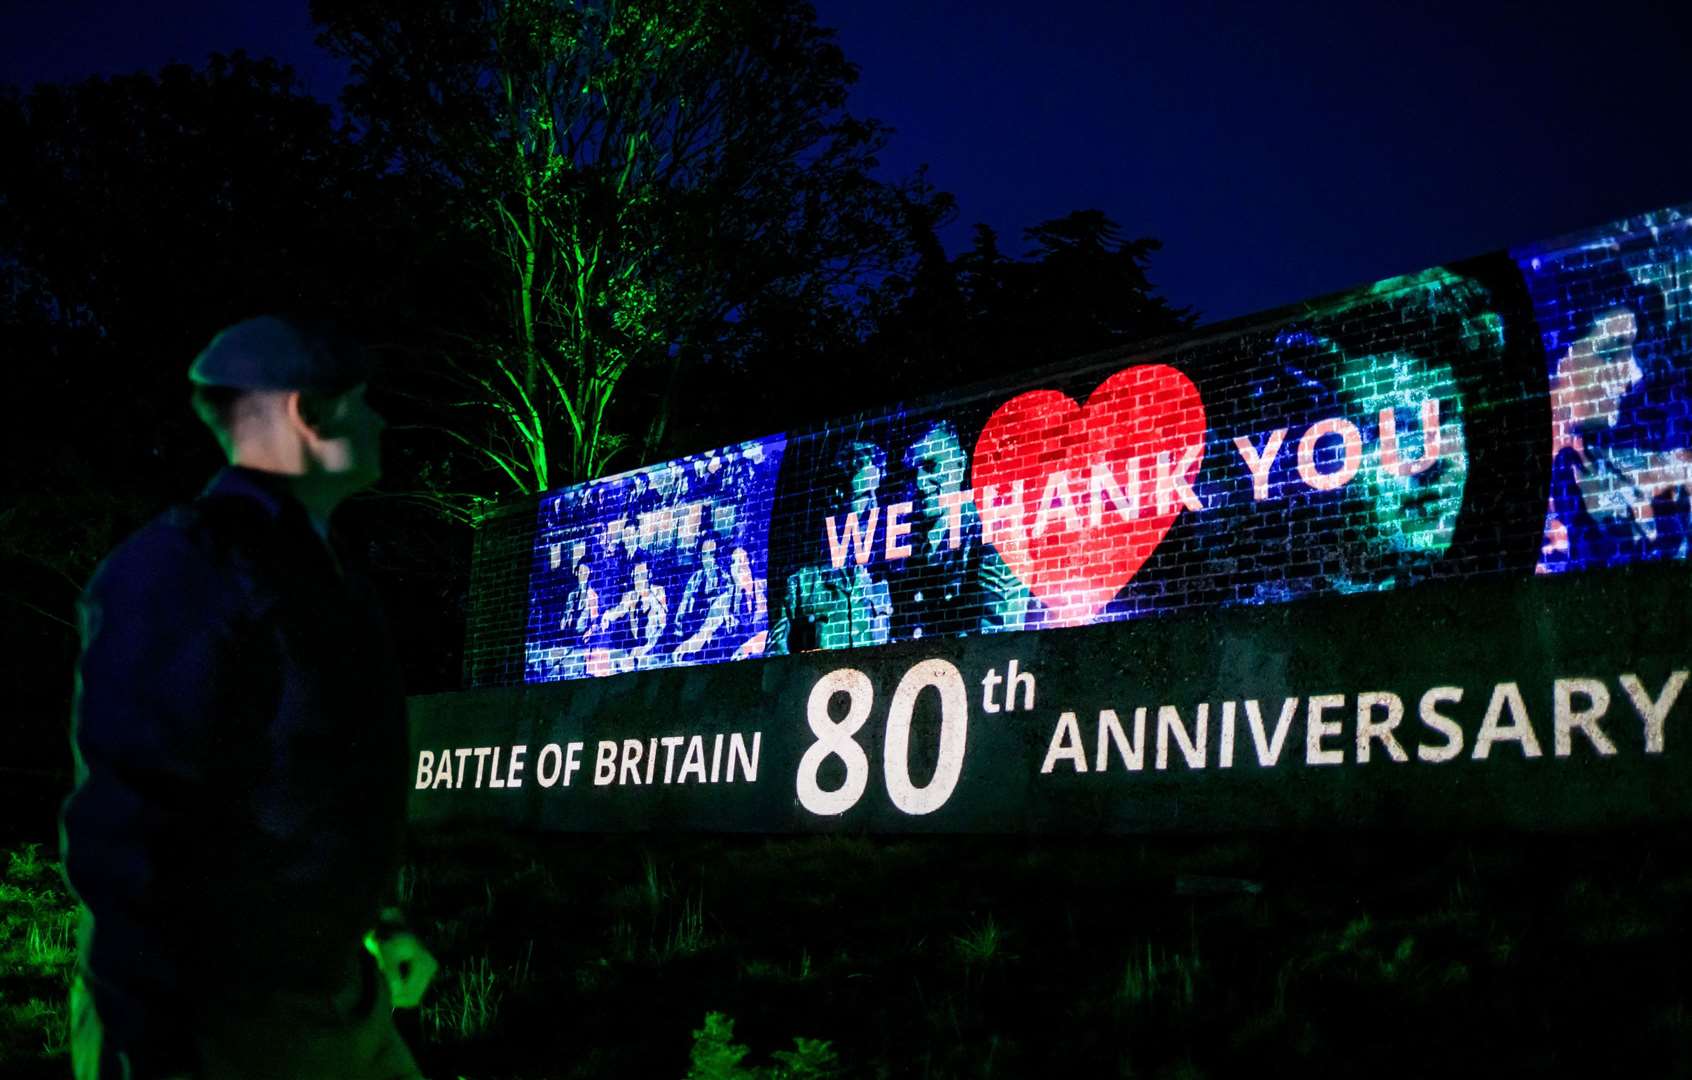 A lightshow tribute marking the 80th anniversary of the Battle of Britain (Teneo/Oliver Dixon/PA)